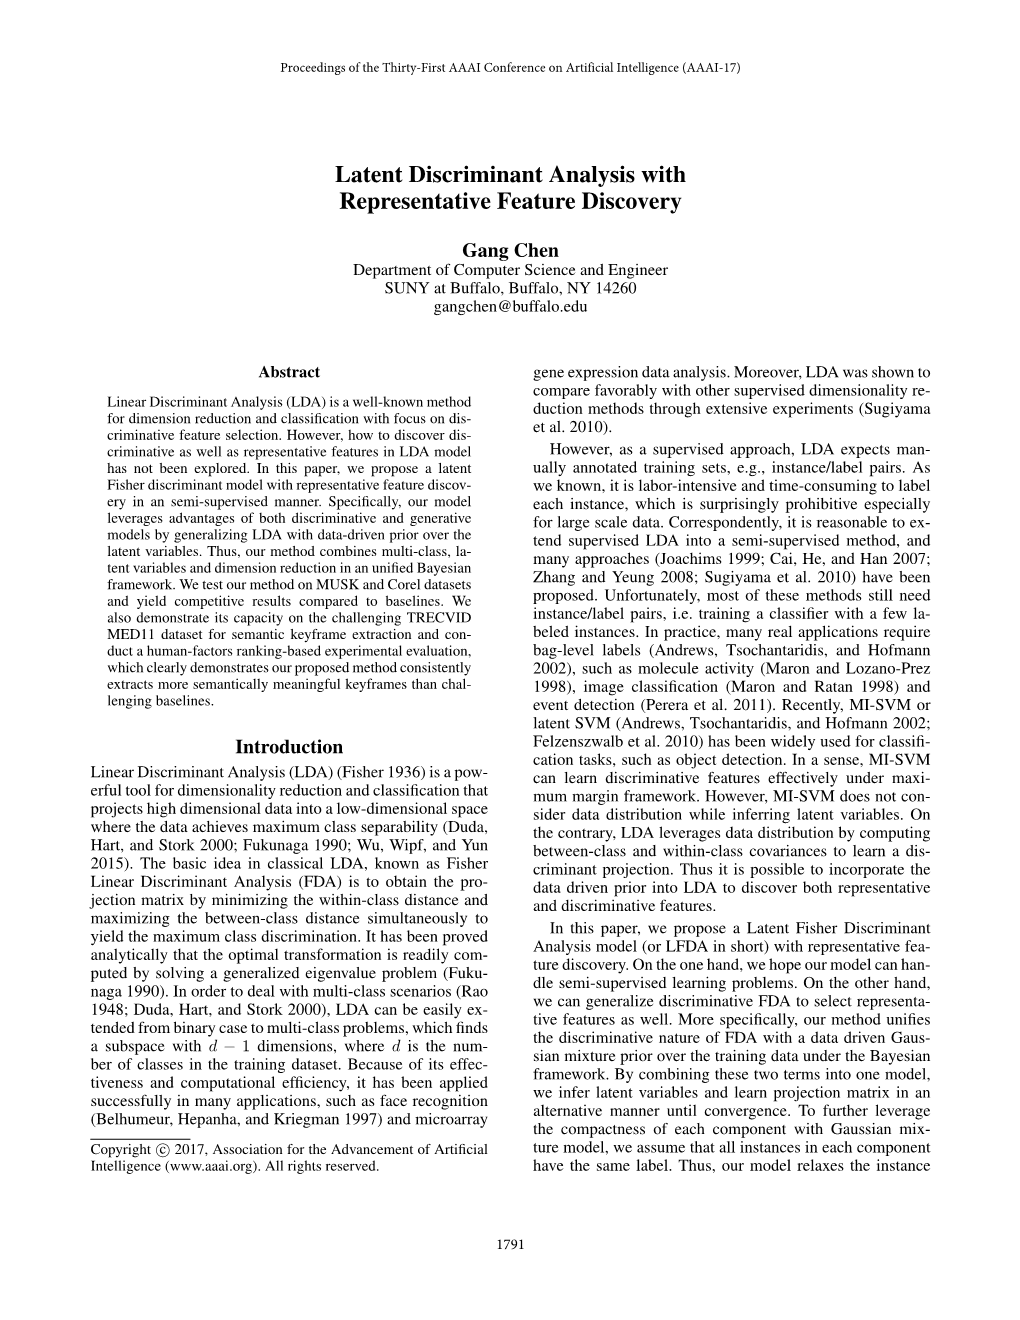 Latent Discriminant Analysis with Representative Feature Discovery